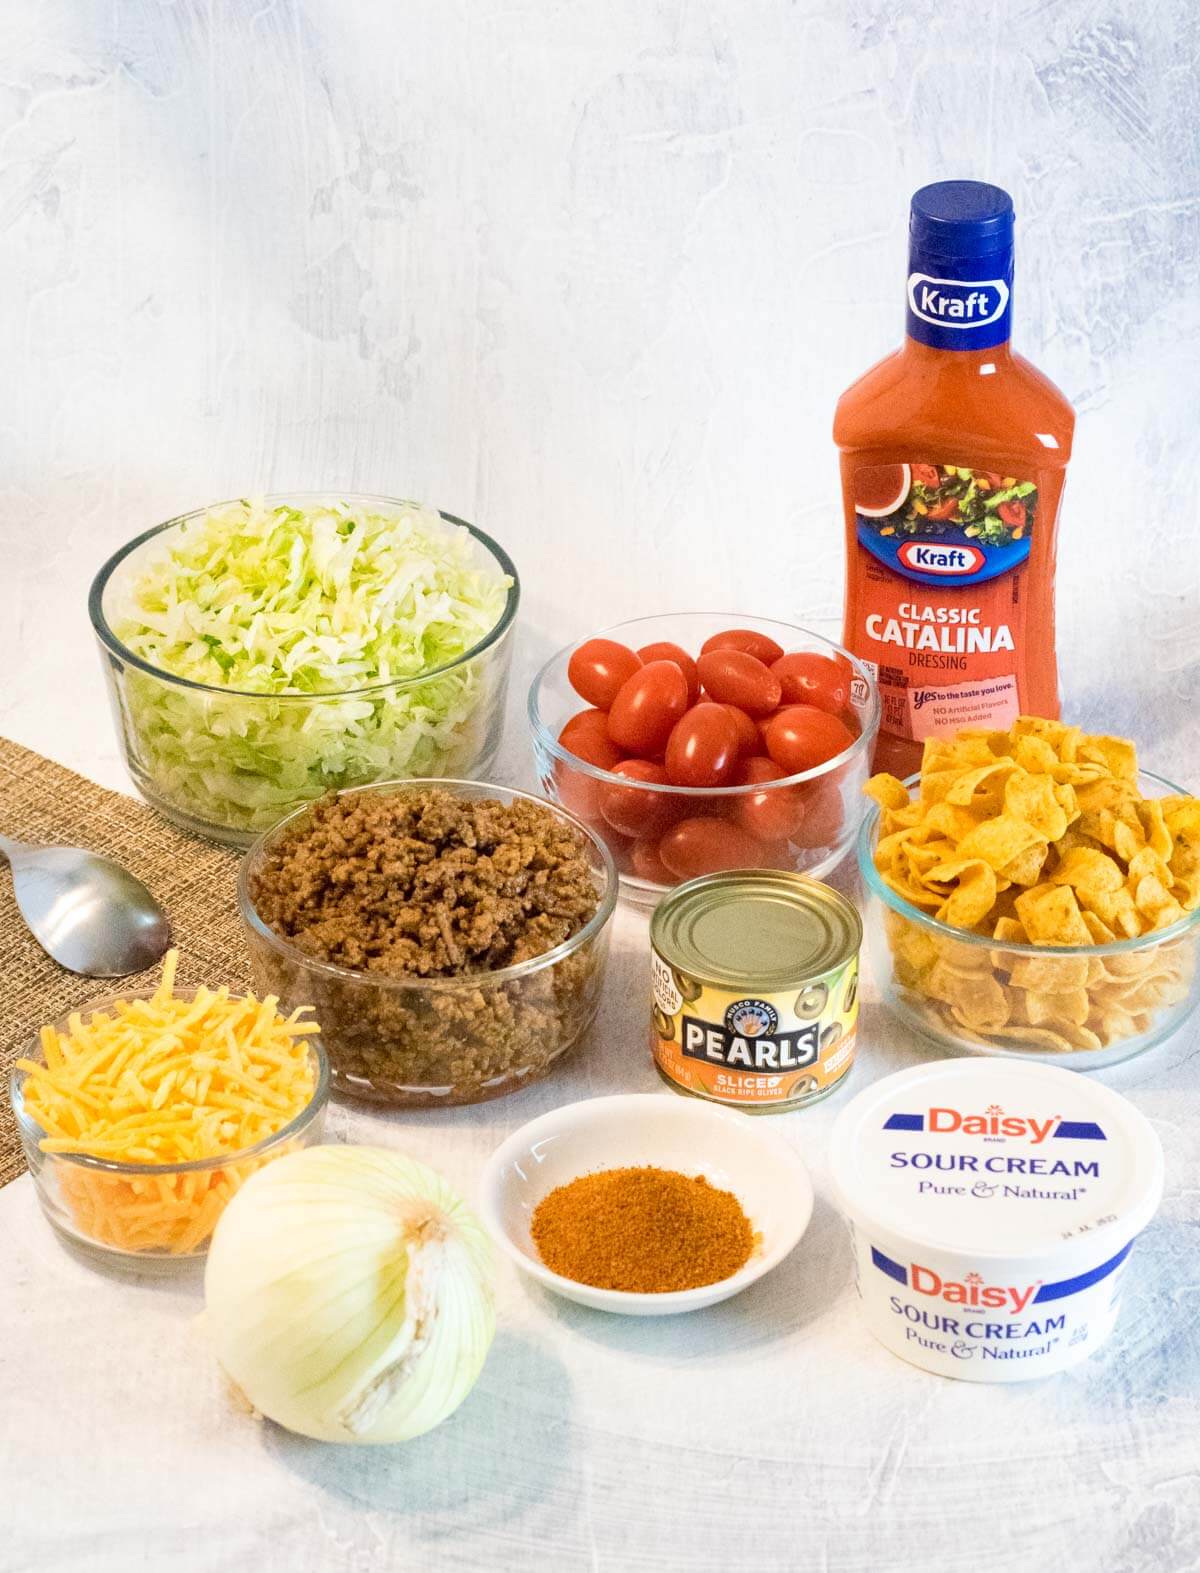 Showing ingredients for Frito Taco Salad.